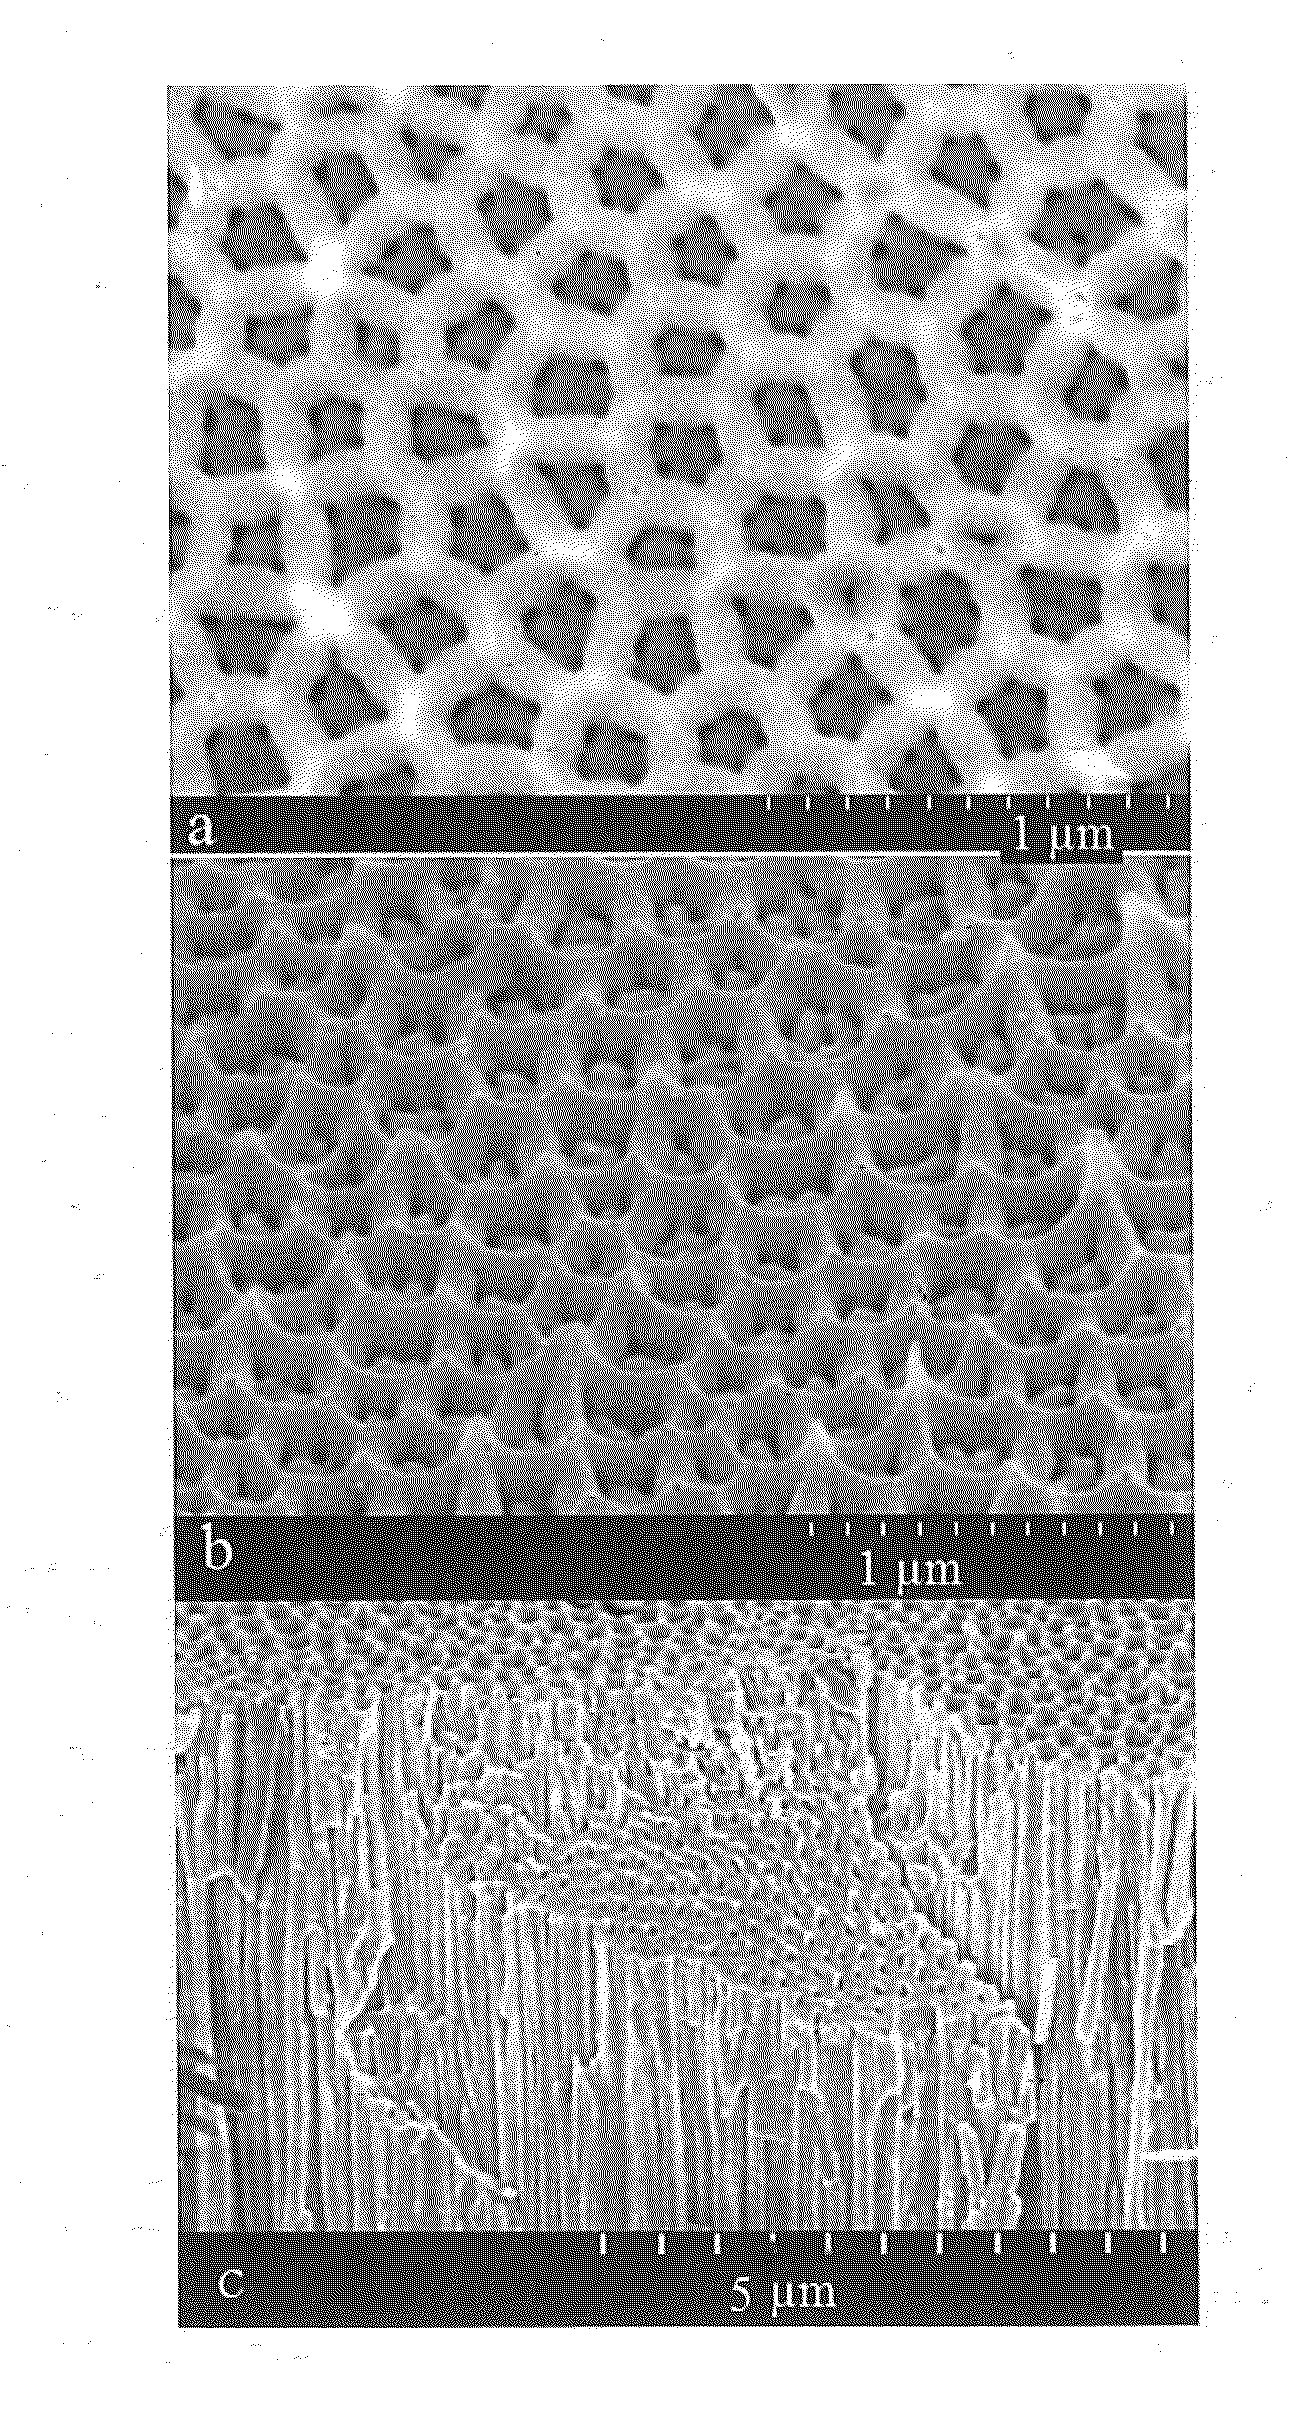 Multilayer anodized aluminium oxide nano-porous membrane and method of manufacture thereof